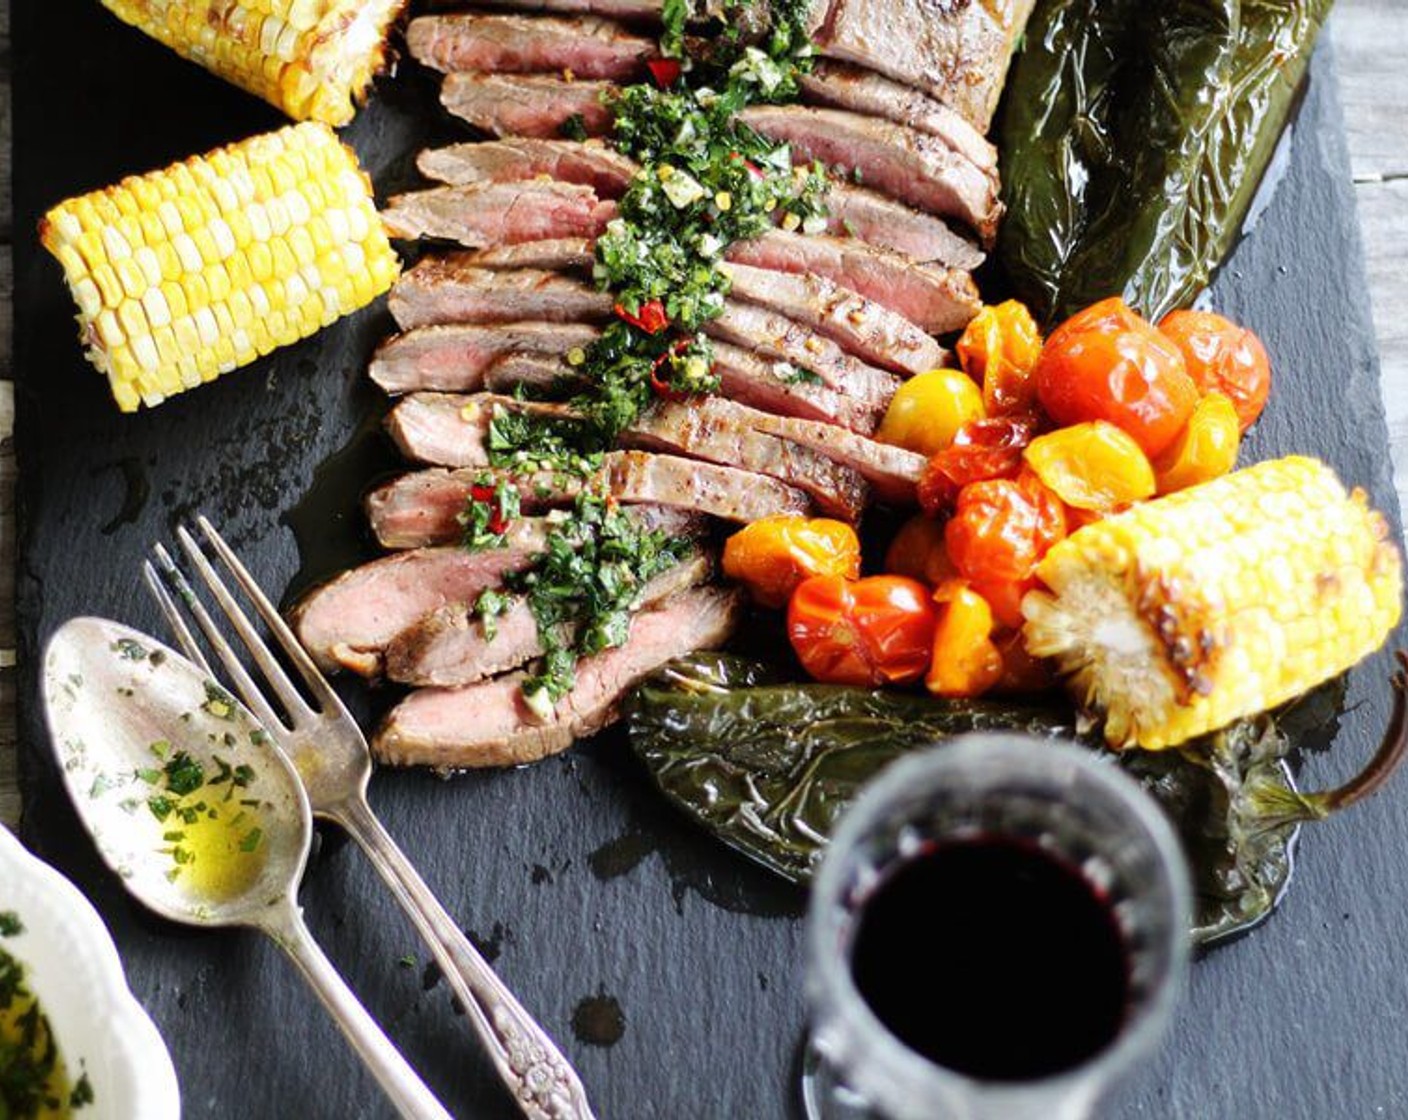 step 9 Transfer the grilled marinated flank steak to a cutting board. Using a serrated knife, slice the flank steaks in thin strips across the grain. Serve warm with roasted vegetables and chimichurri sauce. Enjoy!